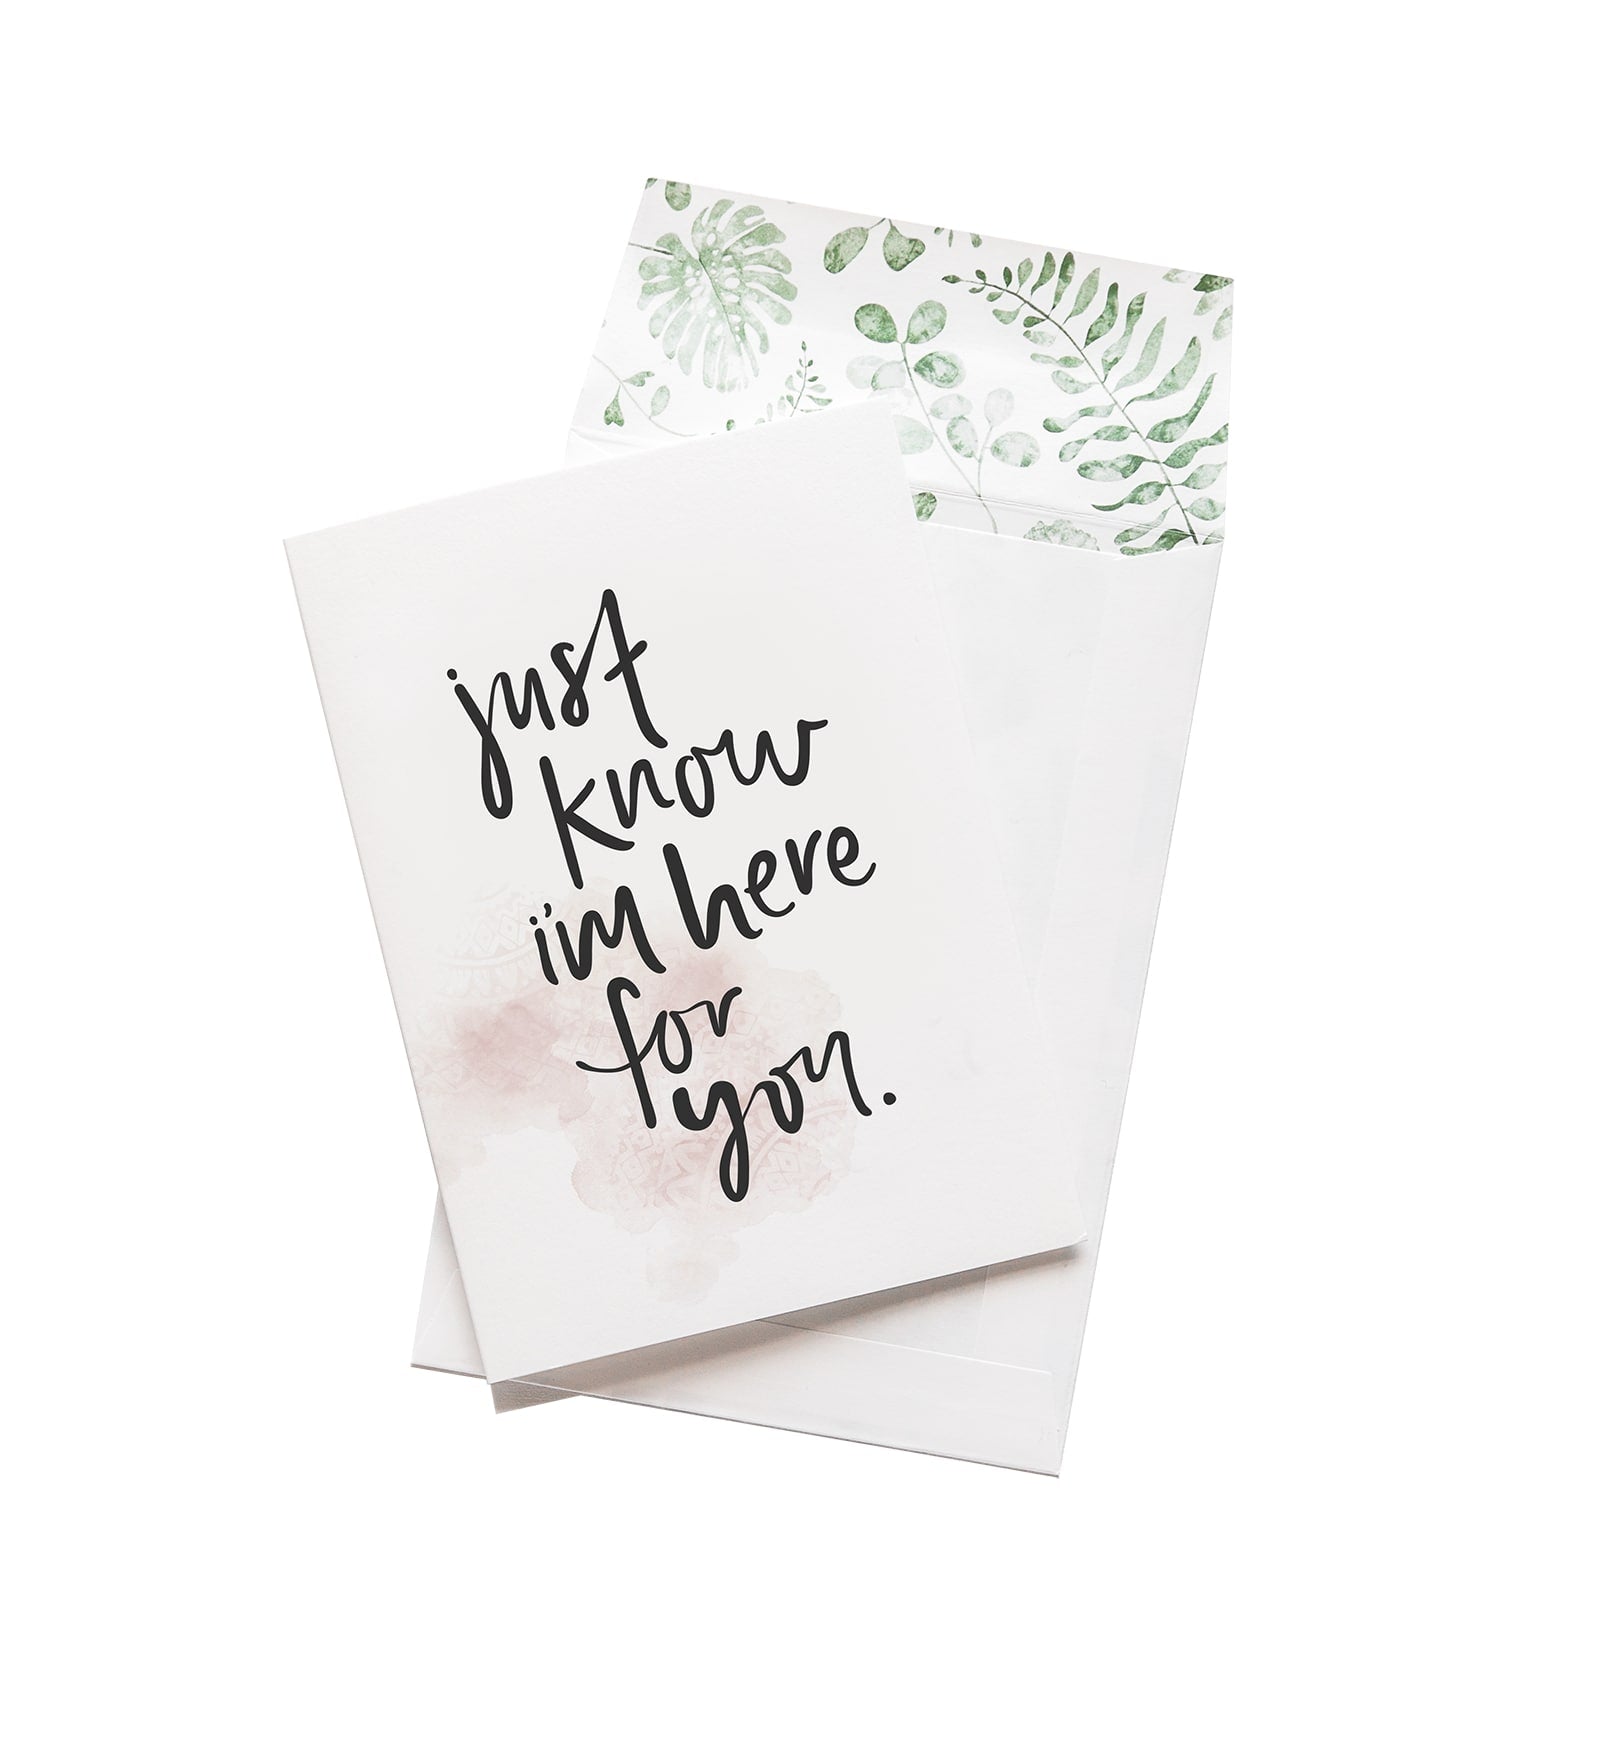 EMMA KATE - Just know I am here for you GREETING CARD